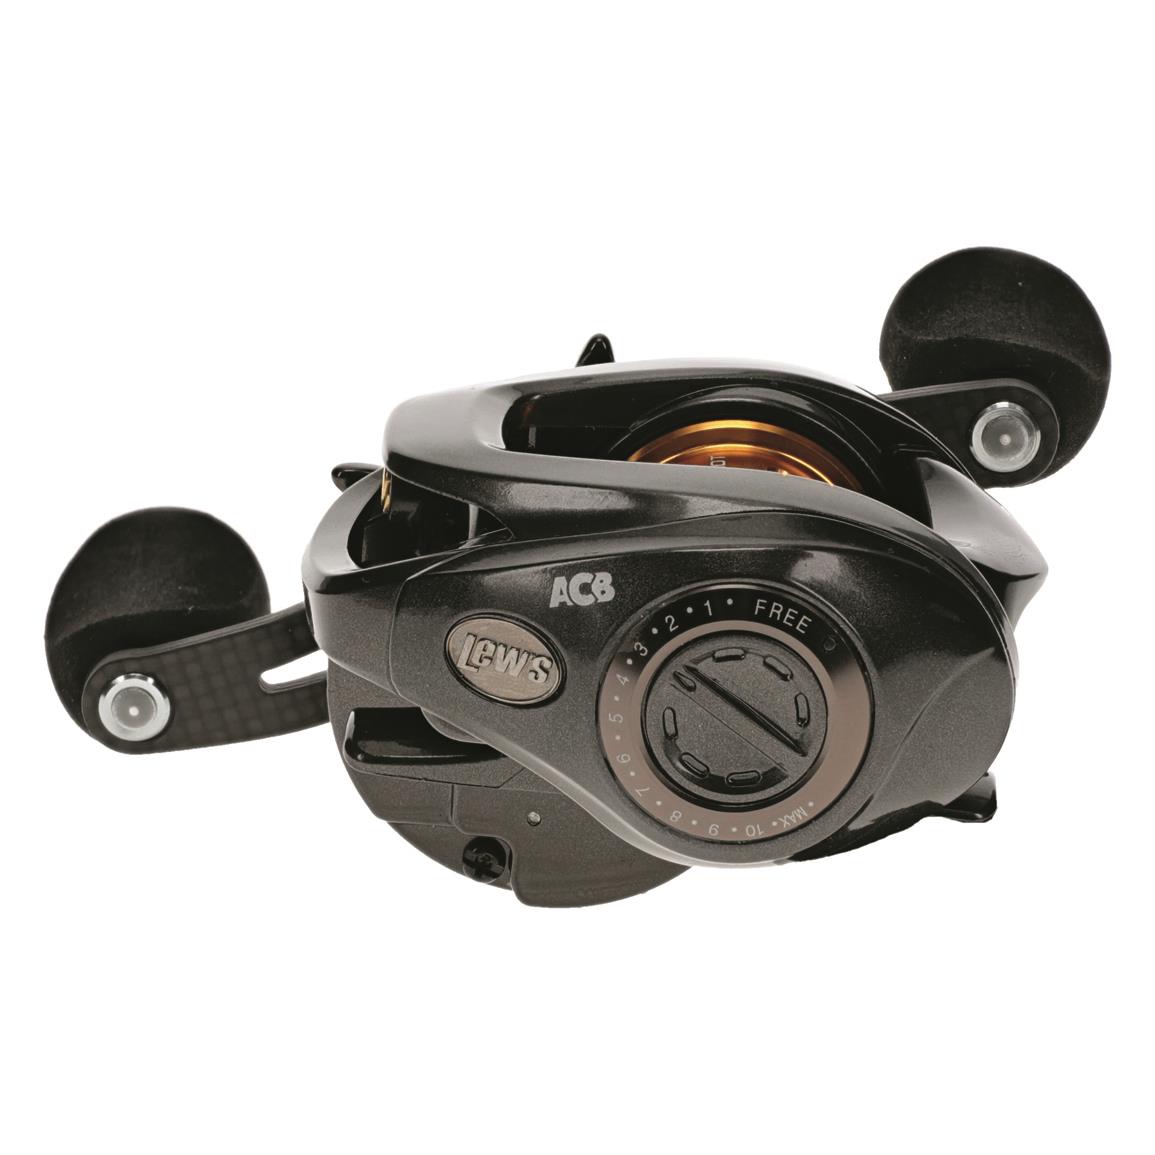 Lew's Team Lew's Pro SP Skipping & Pitching Baitcasting Reels